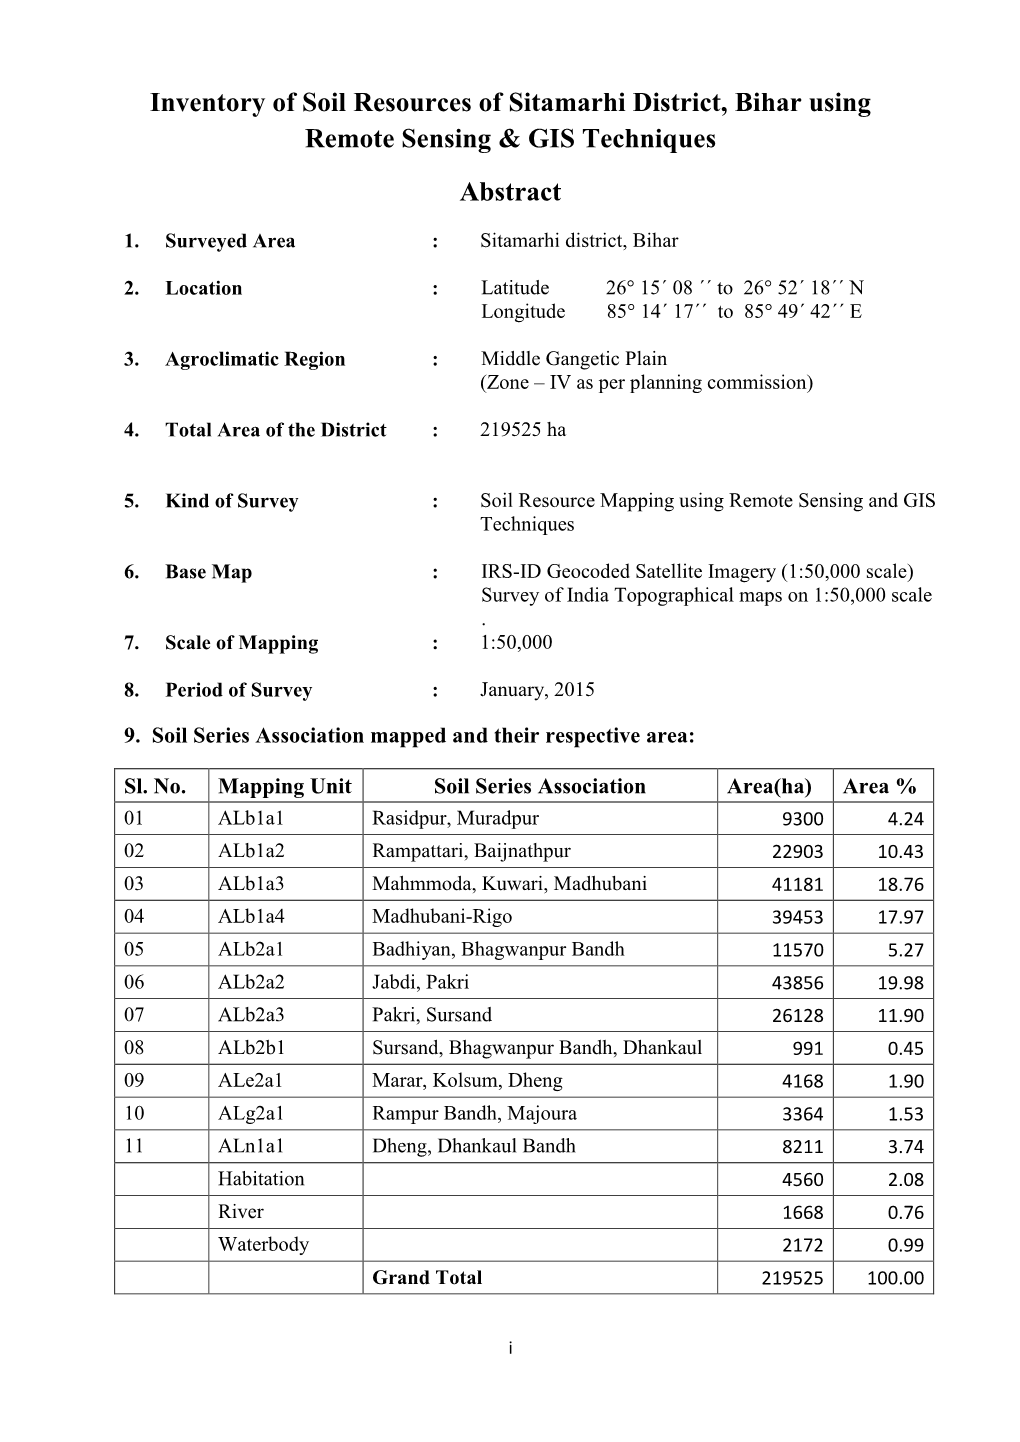 Inventory of Soil Resources of Sitamarhi District, Bihar Using Remote Sensing & GIS Techniques Abstract